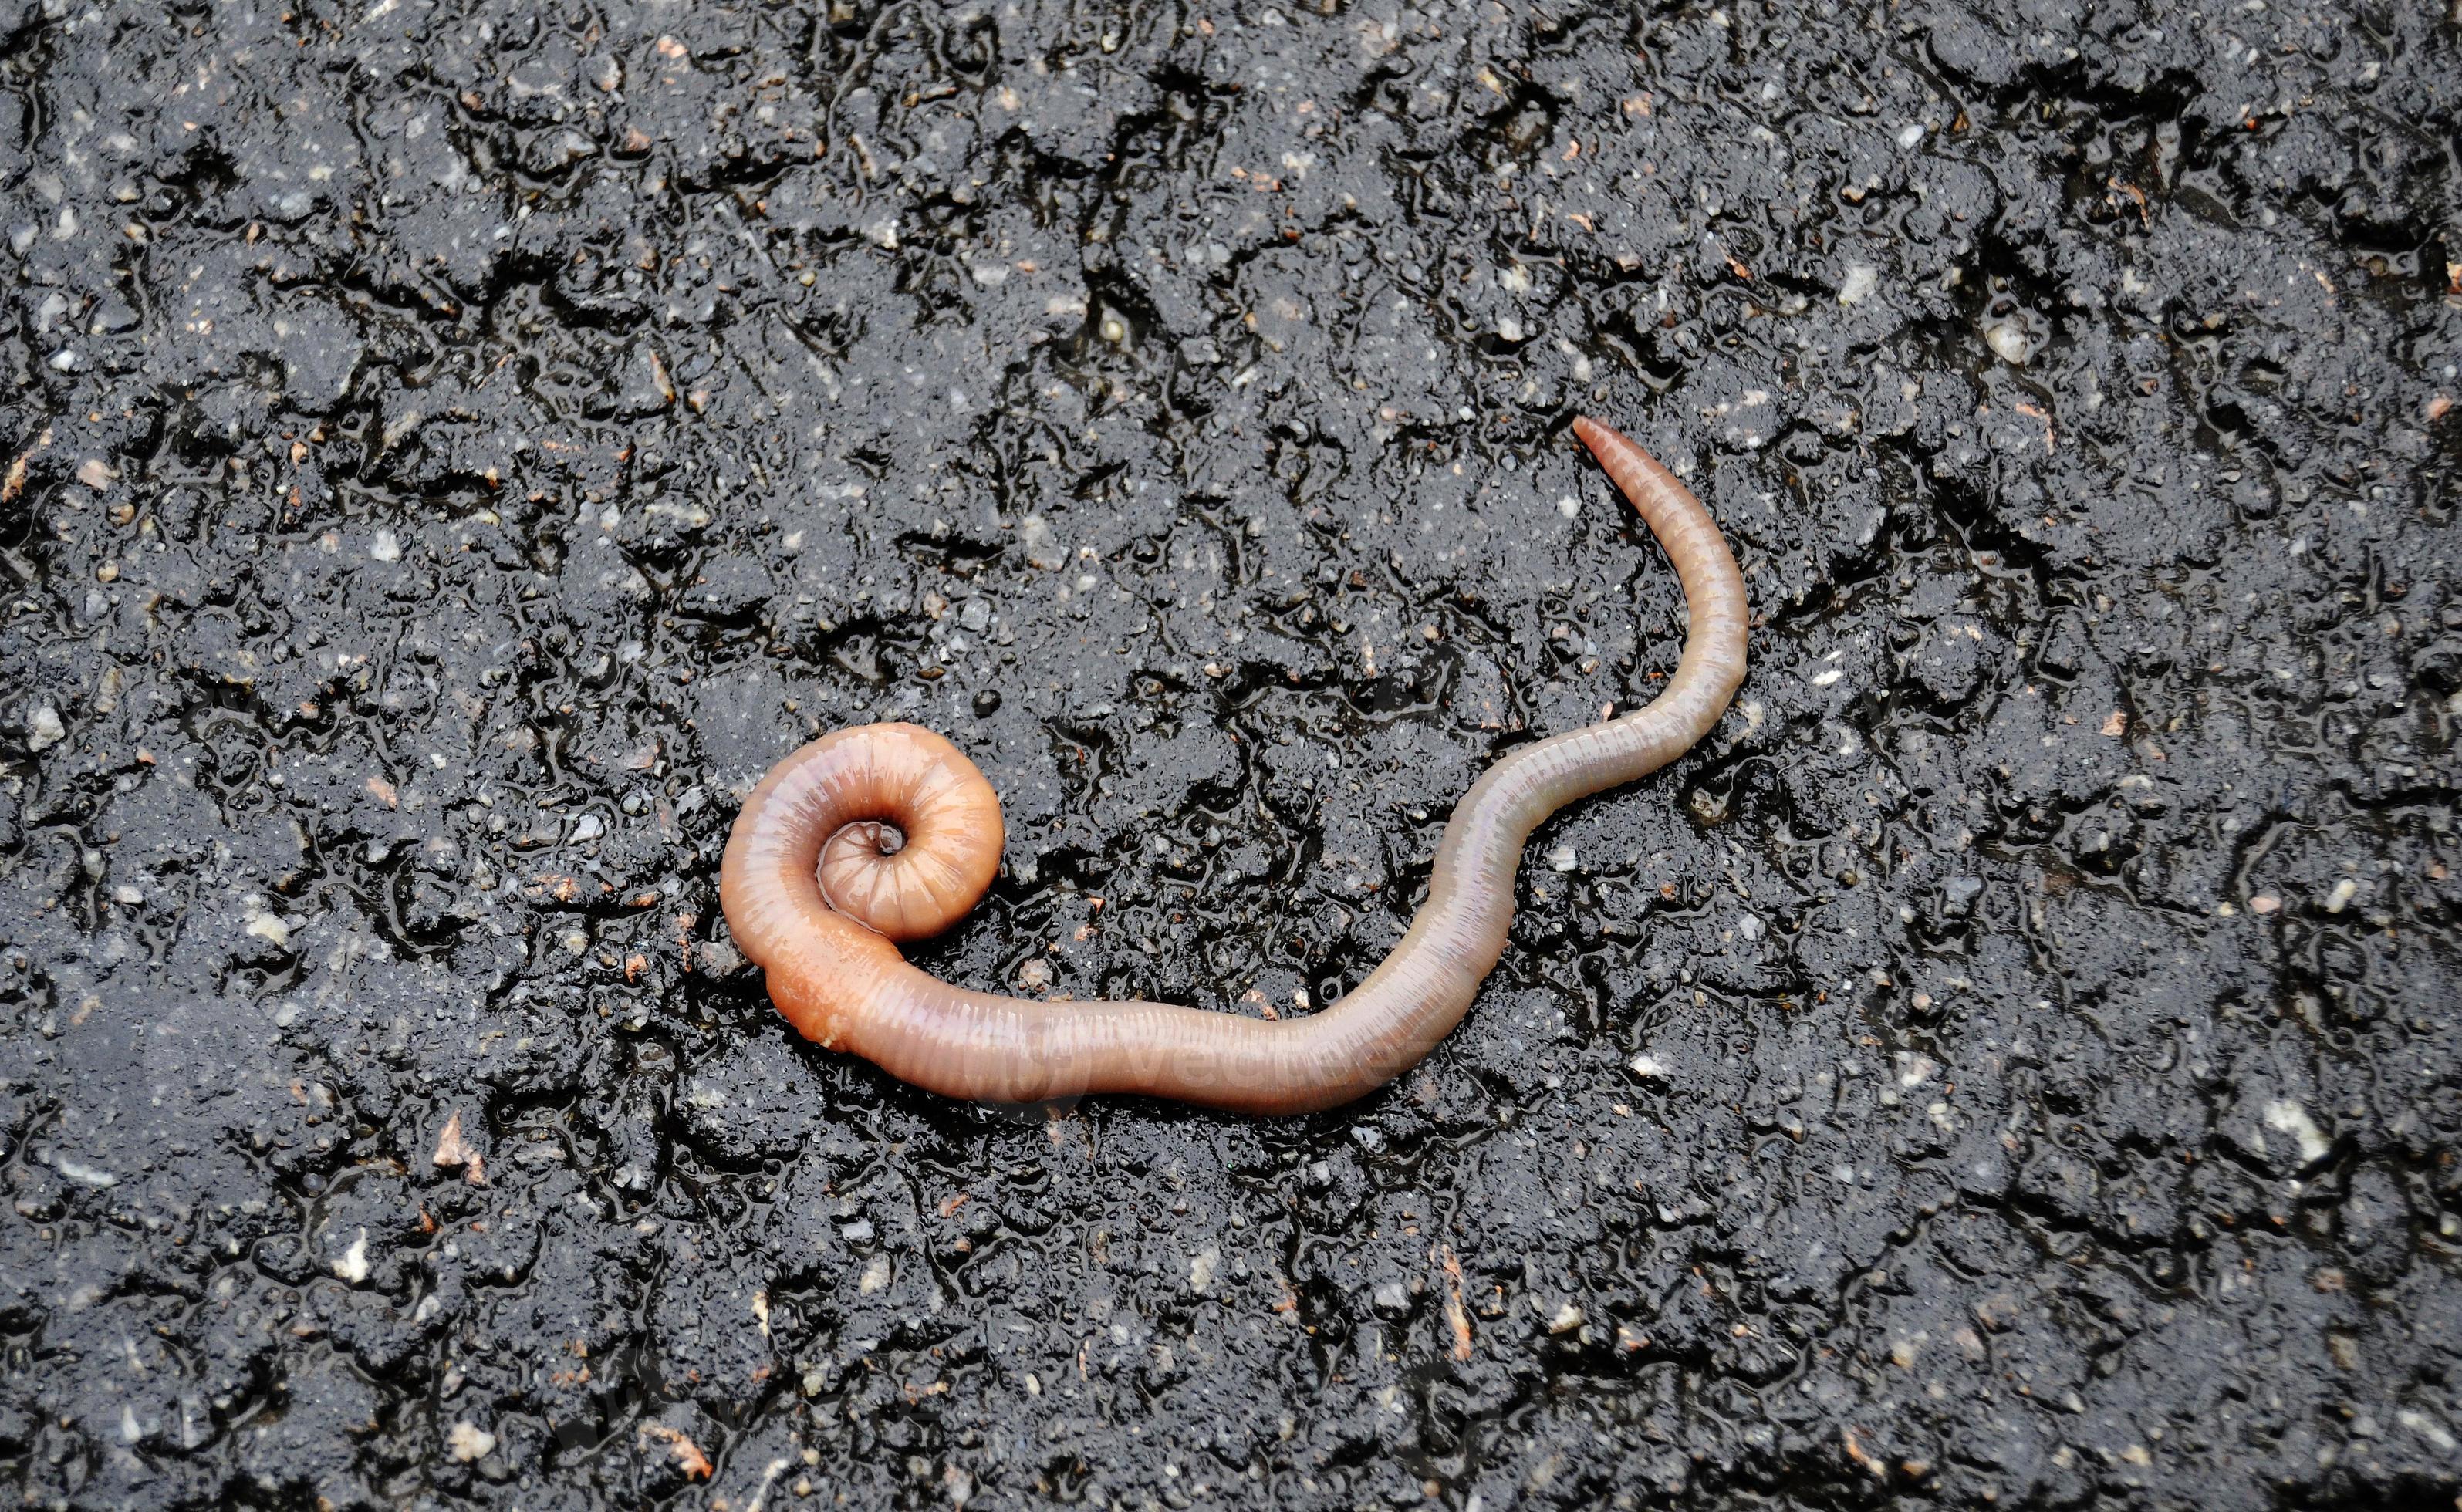 https://static.vecteezy.com/system/resources/previews/003/122/804/large_2x/red-earthworm-it-live-bait-for-fishing-isolated-on-dark-background-photo.JPG